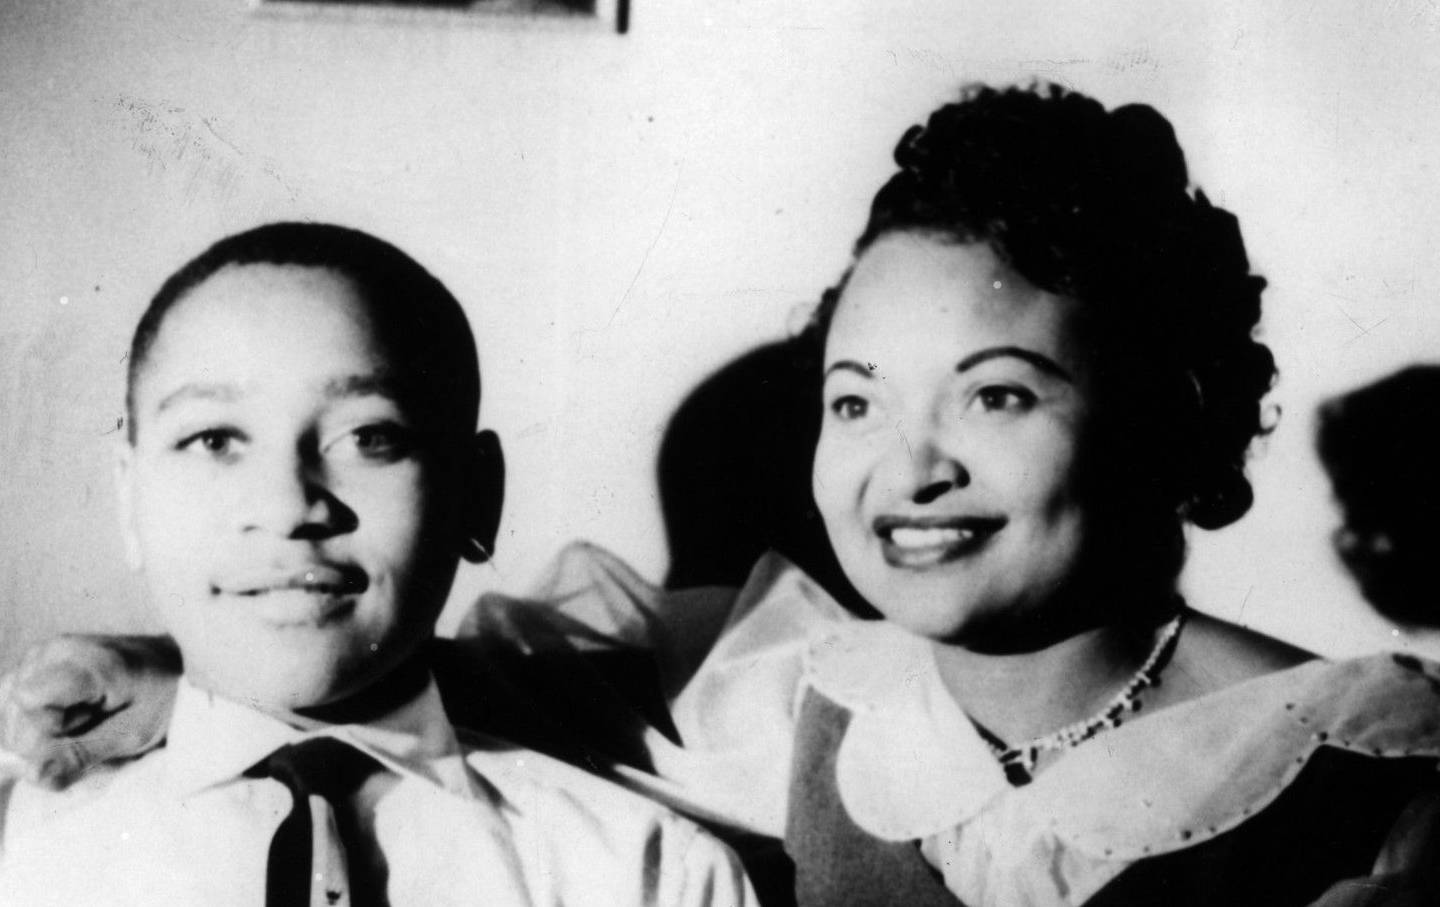 Emmett Louis Till, 14, with his mother, Mamie Till-Mobley, at home in Chicago. (Chicago Tribune file photo/Tribune News Service via Getty Images)